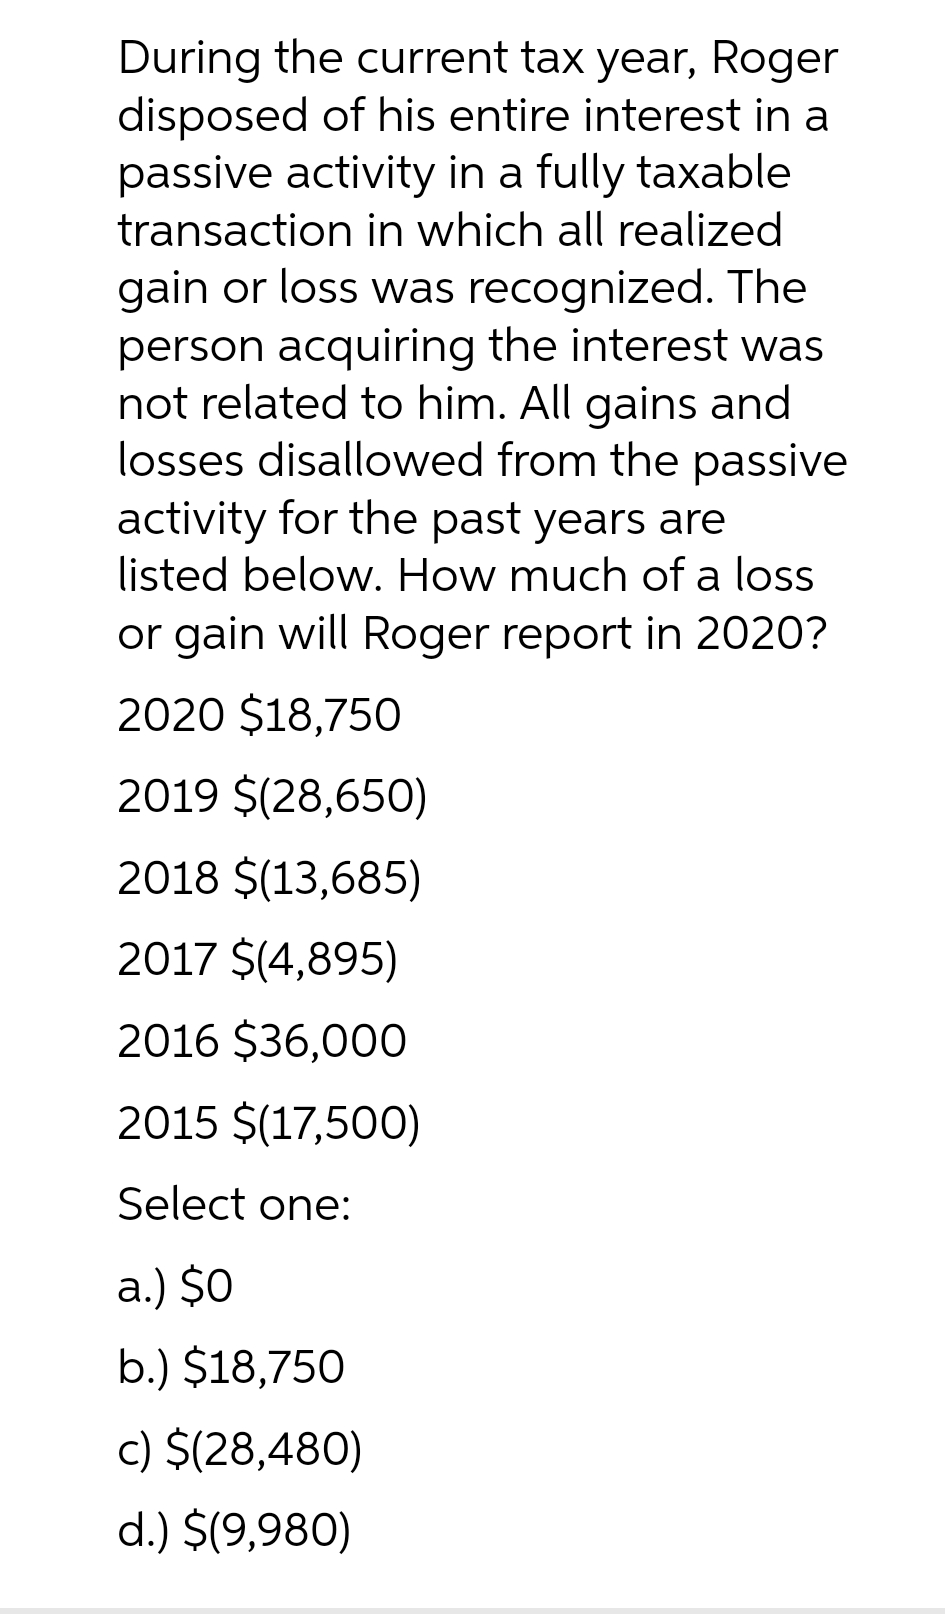 During the current tax year, Roger
disposed of his entire interest in a
passive activity in a fully taxable
transaction in which all realized
gain or loss was recognized. The
person acquiring the interest was
not related to him. All gains and
losses disallowed from the passive
activity for the past years are
listed below. How much of a loss
or gain will Roger report in 2020?
2020 $18,750
2019 $(28,650)
2018 $(13,685)
2017 $(4,895)
2016 $36,000
2015 $(17,500)
Select one:
a.) $0
b.) $18,750
c) $(28,480)
d.) $(9,980)